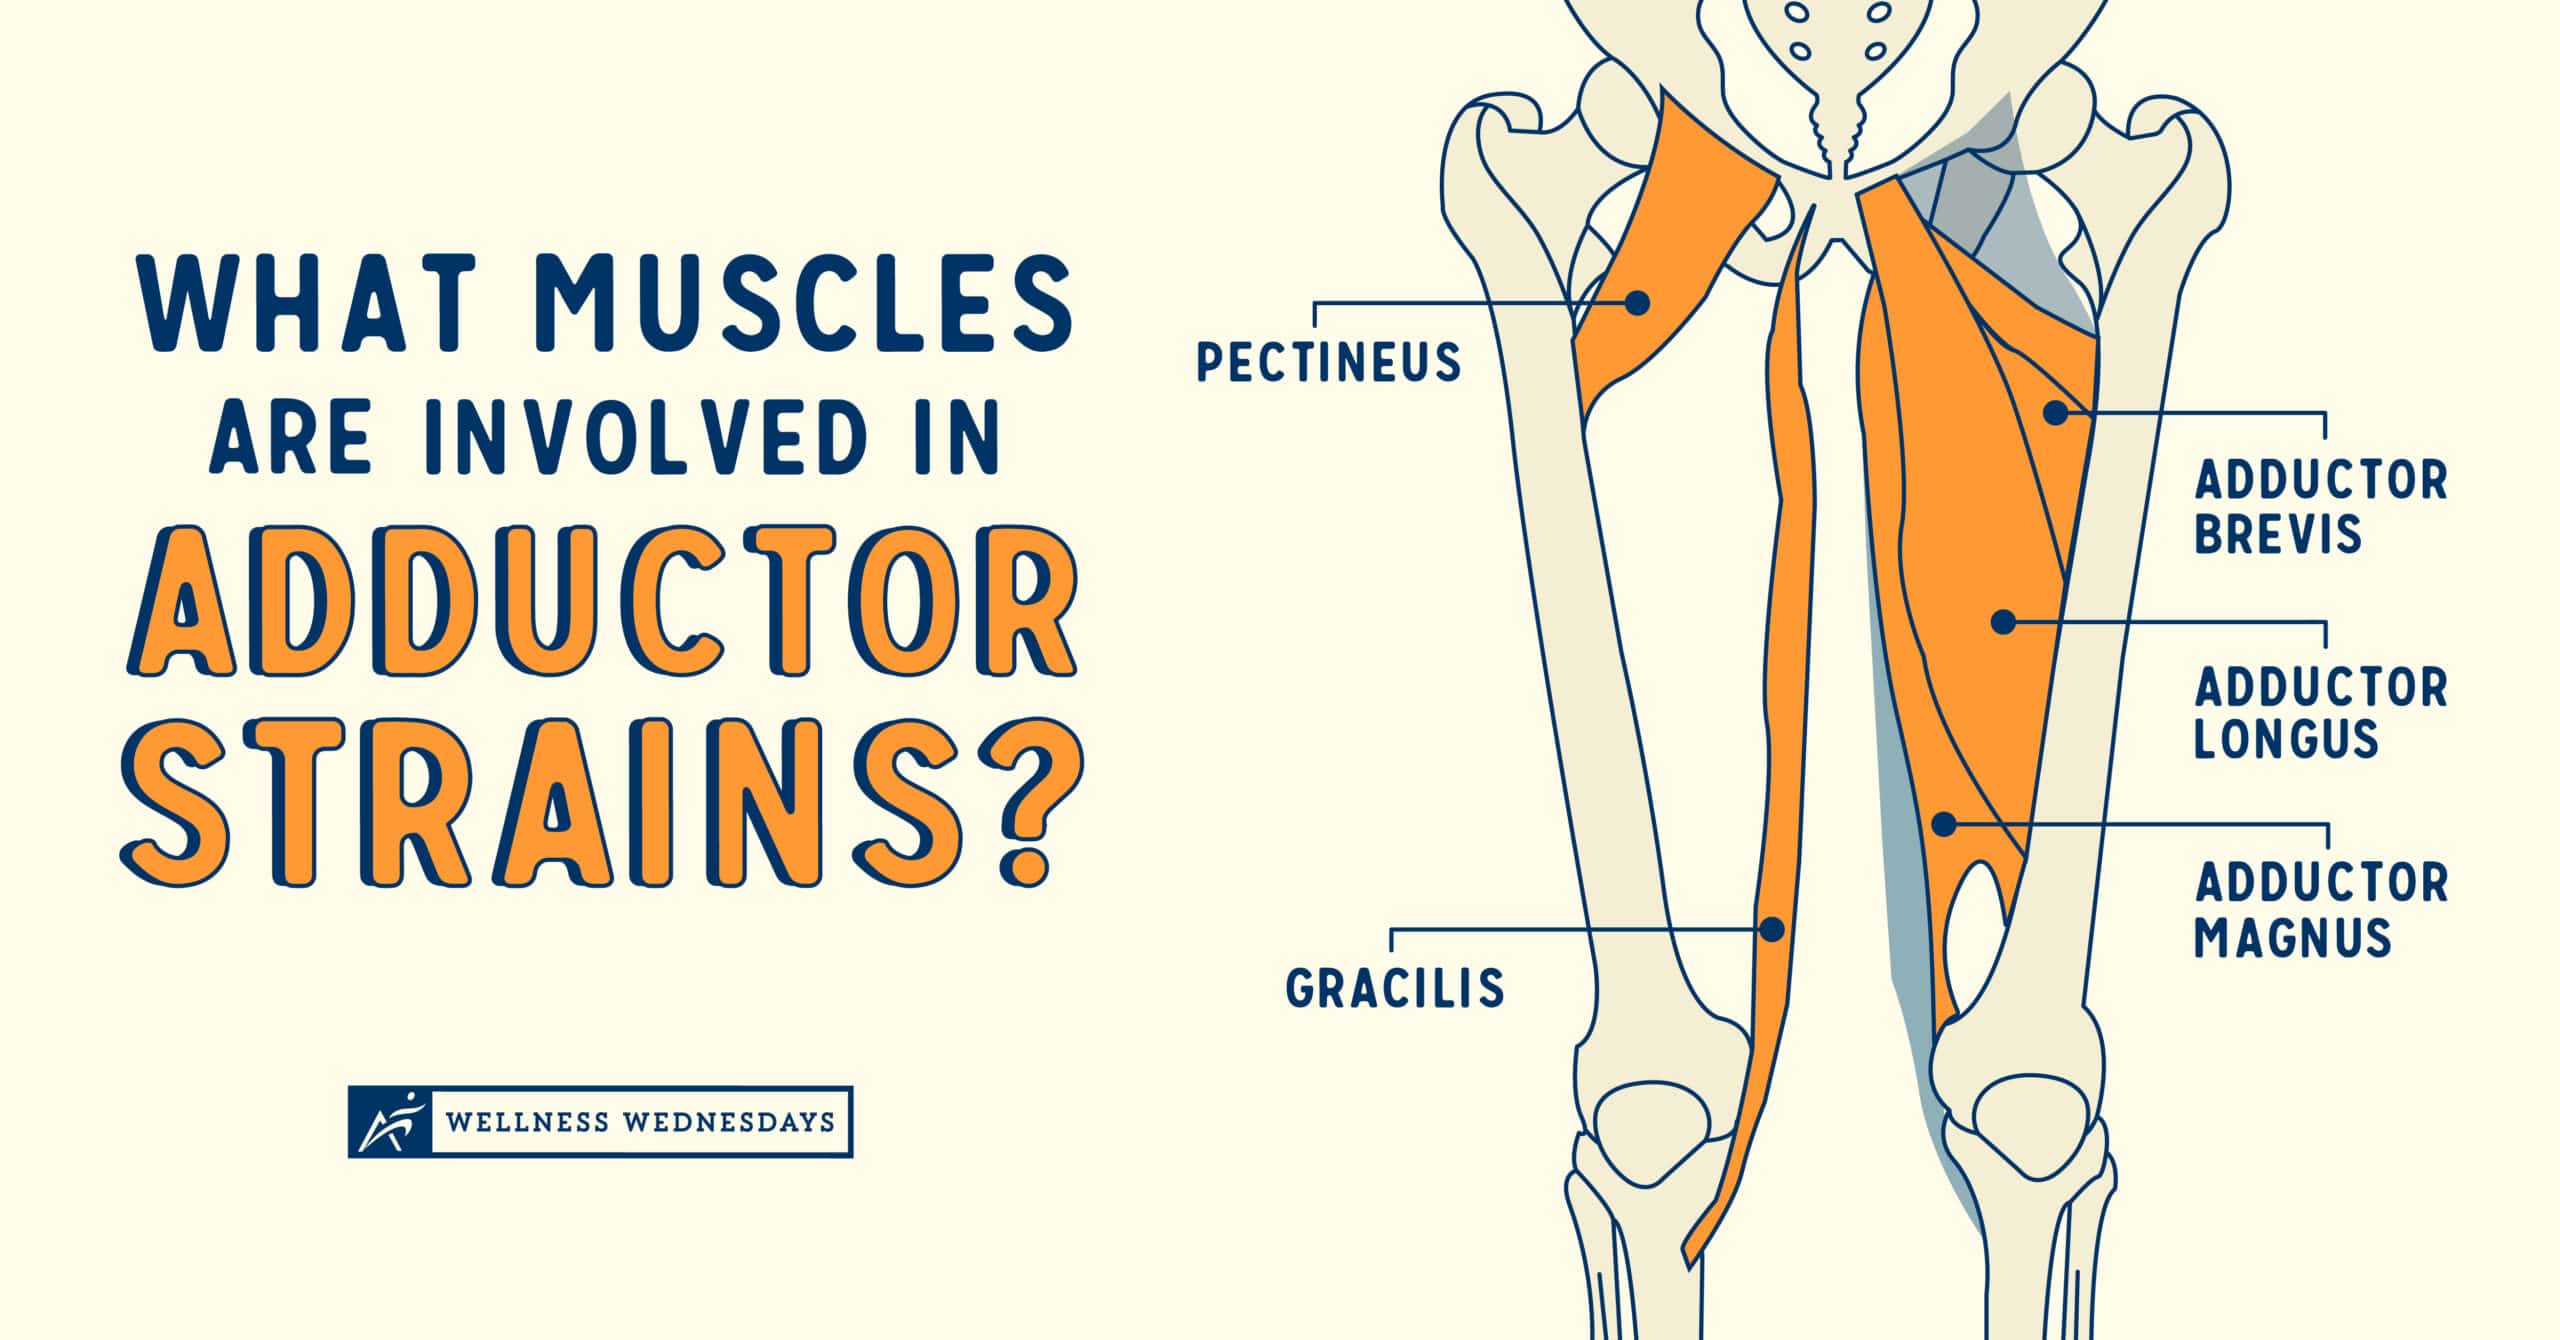 What Muscles are Involved in Adductor Strains?